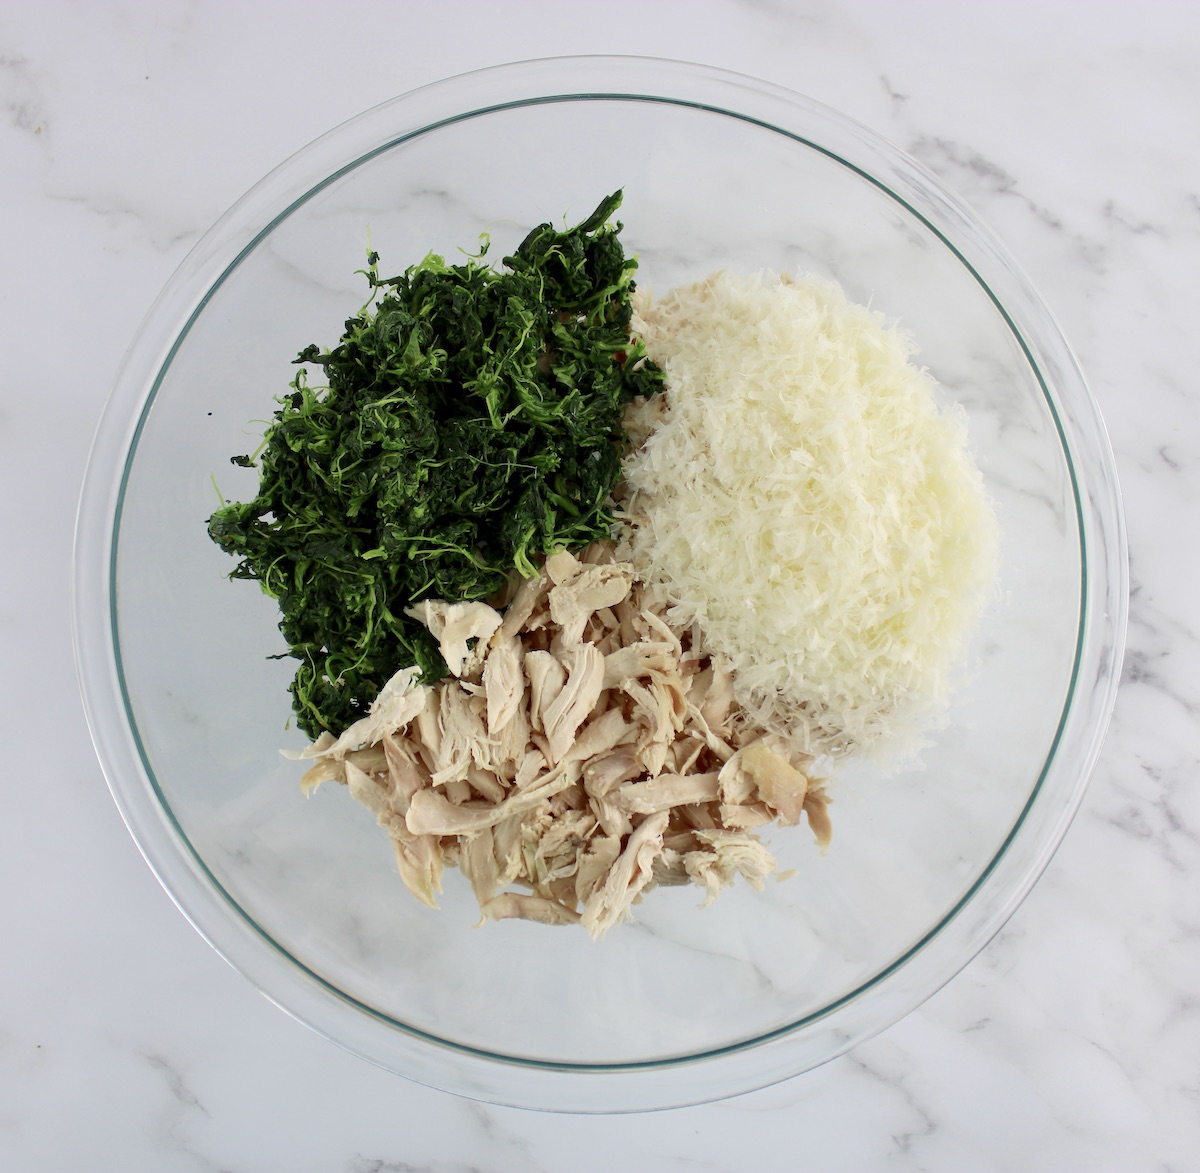 shredded chicken, cooked spinach and grated parmesan cheese in glass bowl unmixed